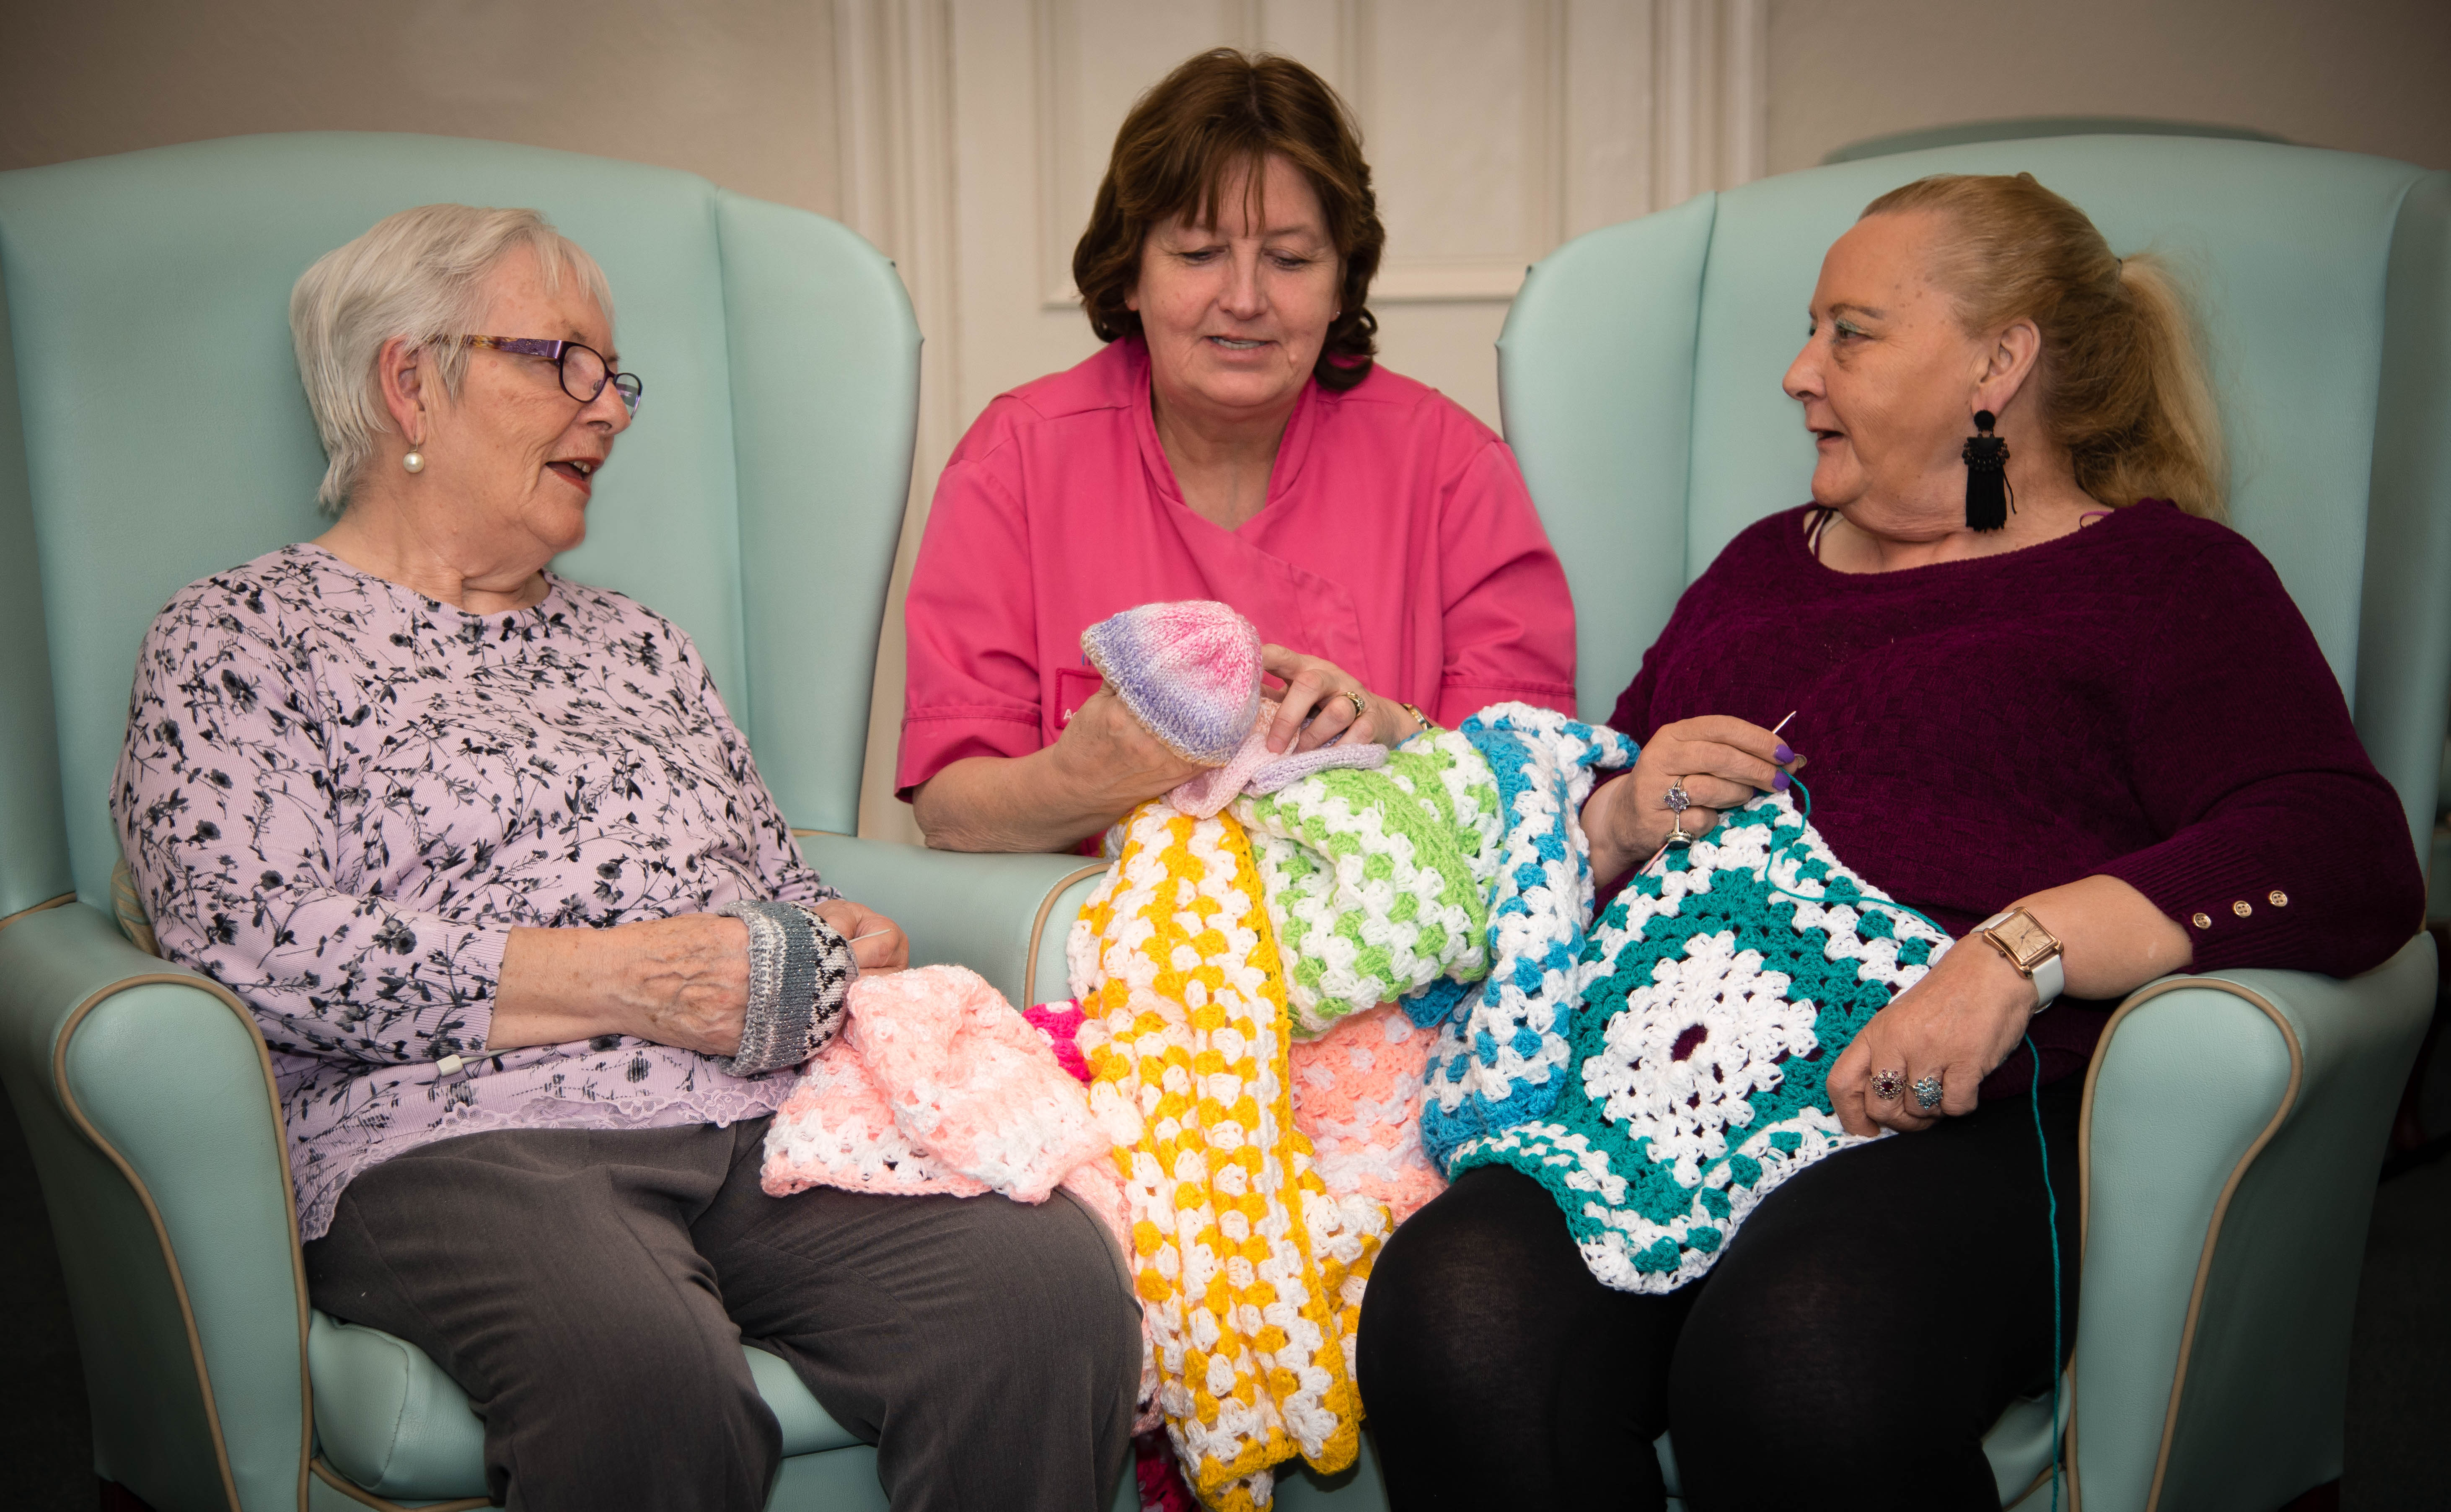 Purl of an idea to help premature babies